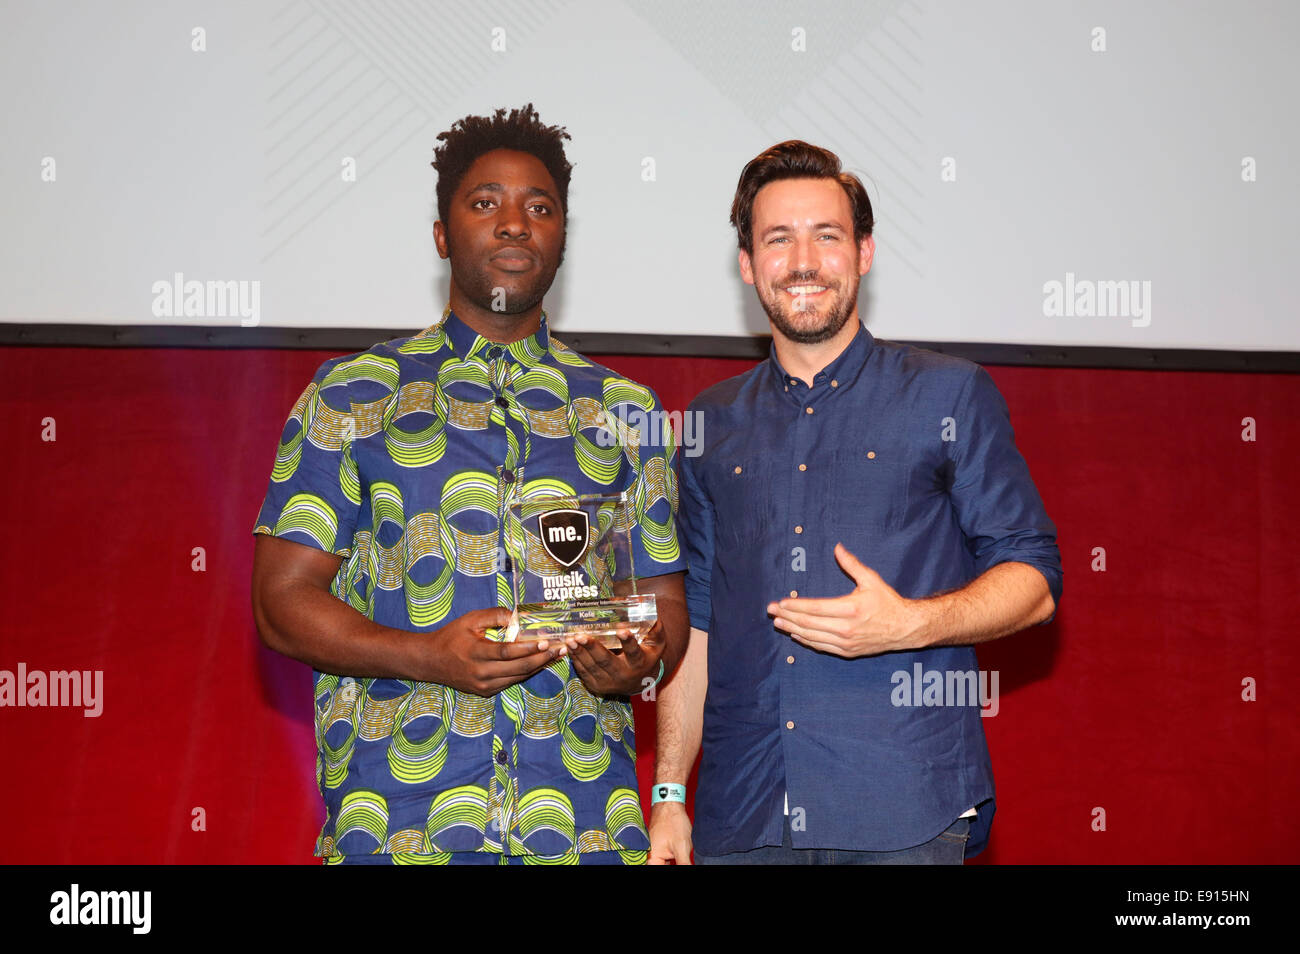 Berlin, Germany. 15th Oct, 2014. Kele Okereke and Jan Koeppen attend the Musikexpress Style Award 2014 on 15.10.2014 at the E-Werk in Berlin. Credit:  dpa picture alliance/Alamy Live News Stock Photo